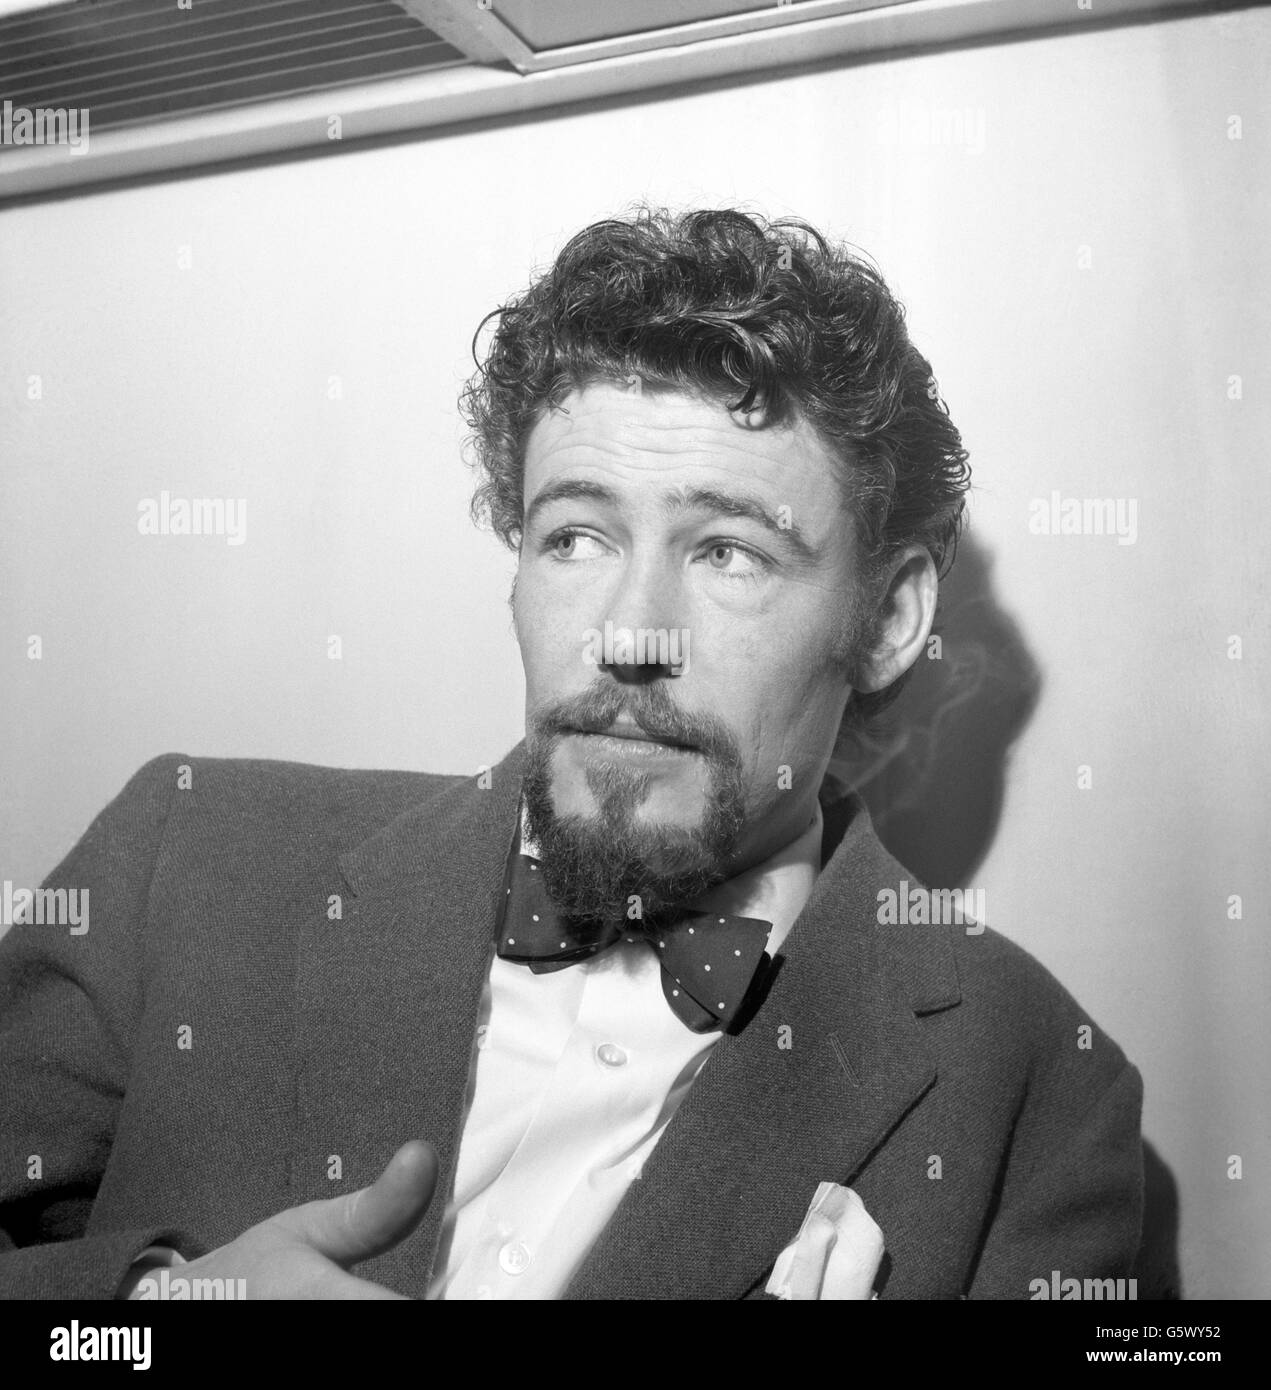 Actor Peter O'Toole at the 8th Showbusiness Awards of the Variety Club of Great Britain, where he received the Stage Actor of the Year 1959 award for his performance in 'The Long and the Short and the Tall'. Stock Photo